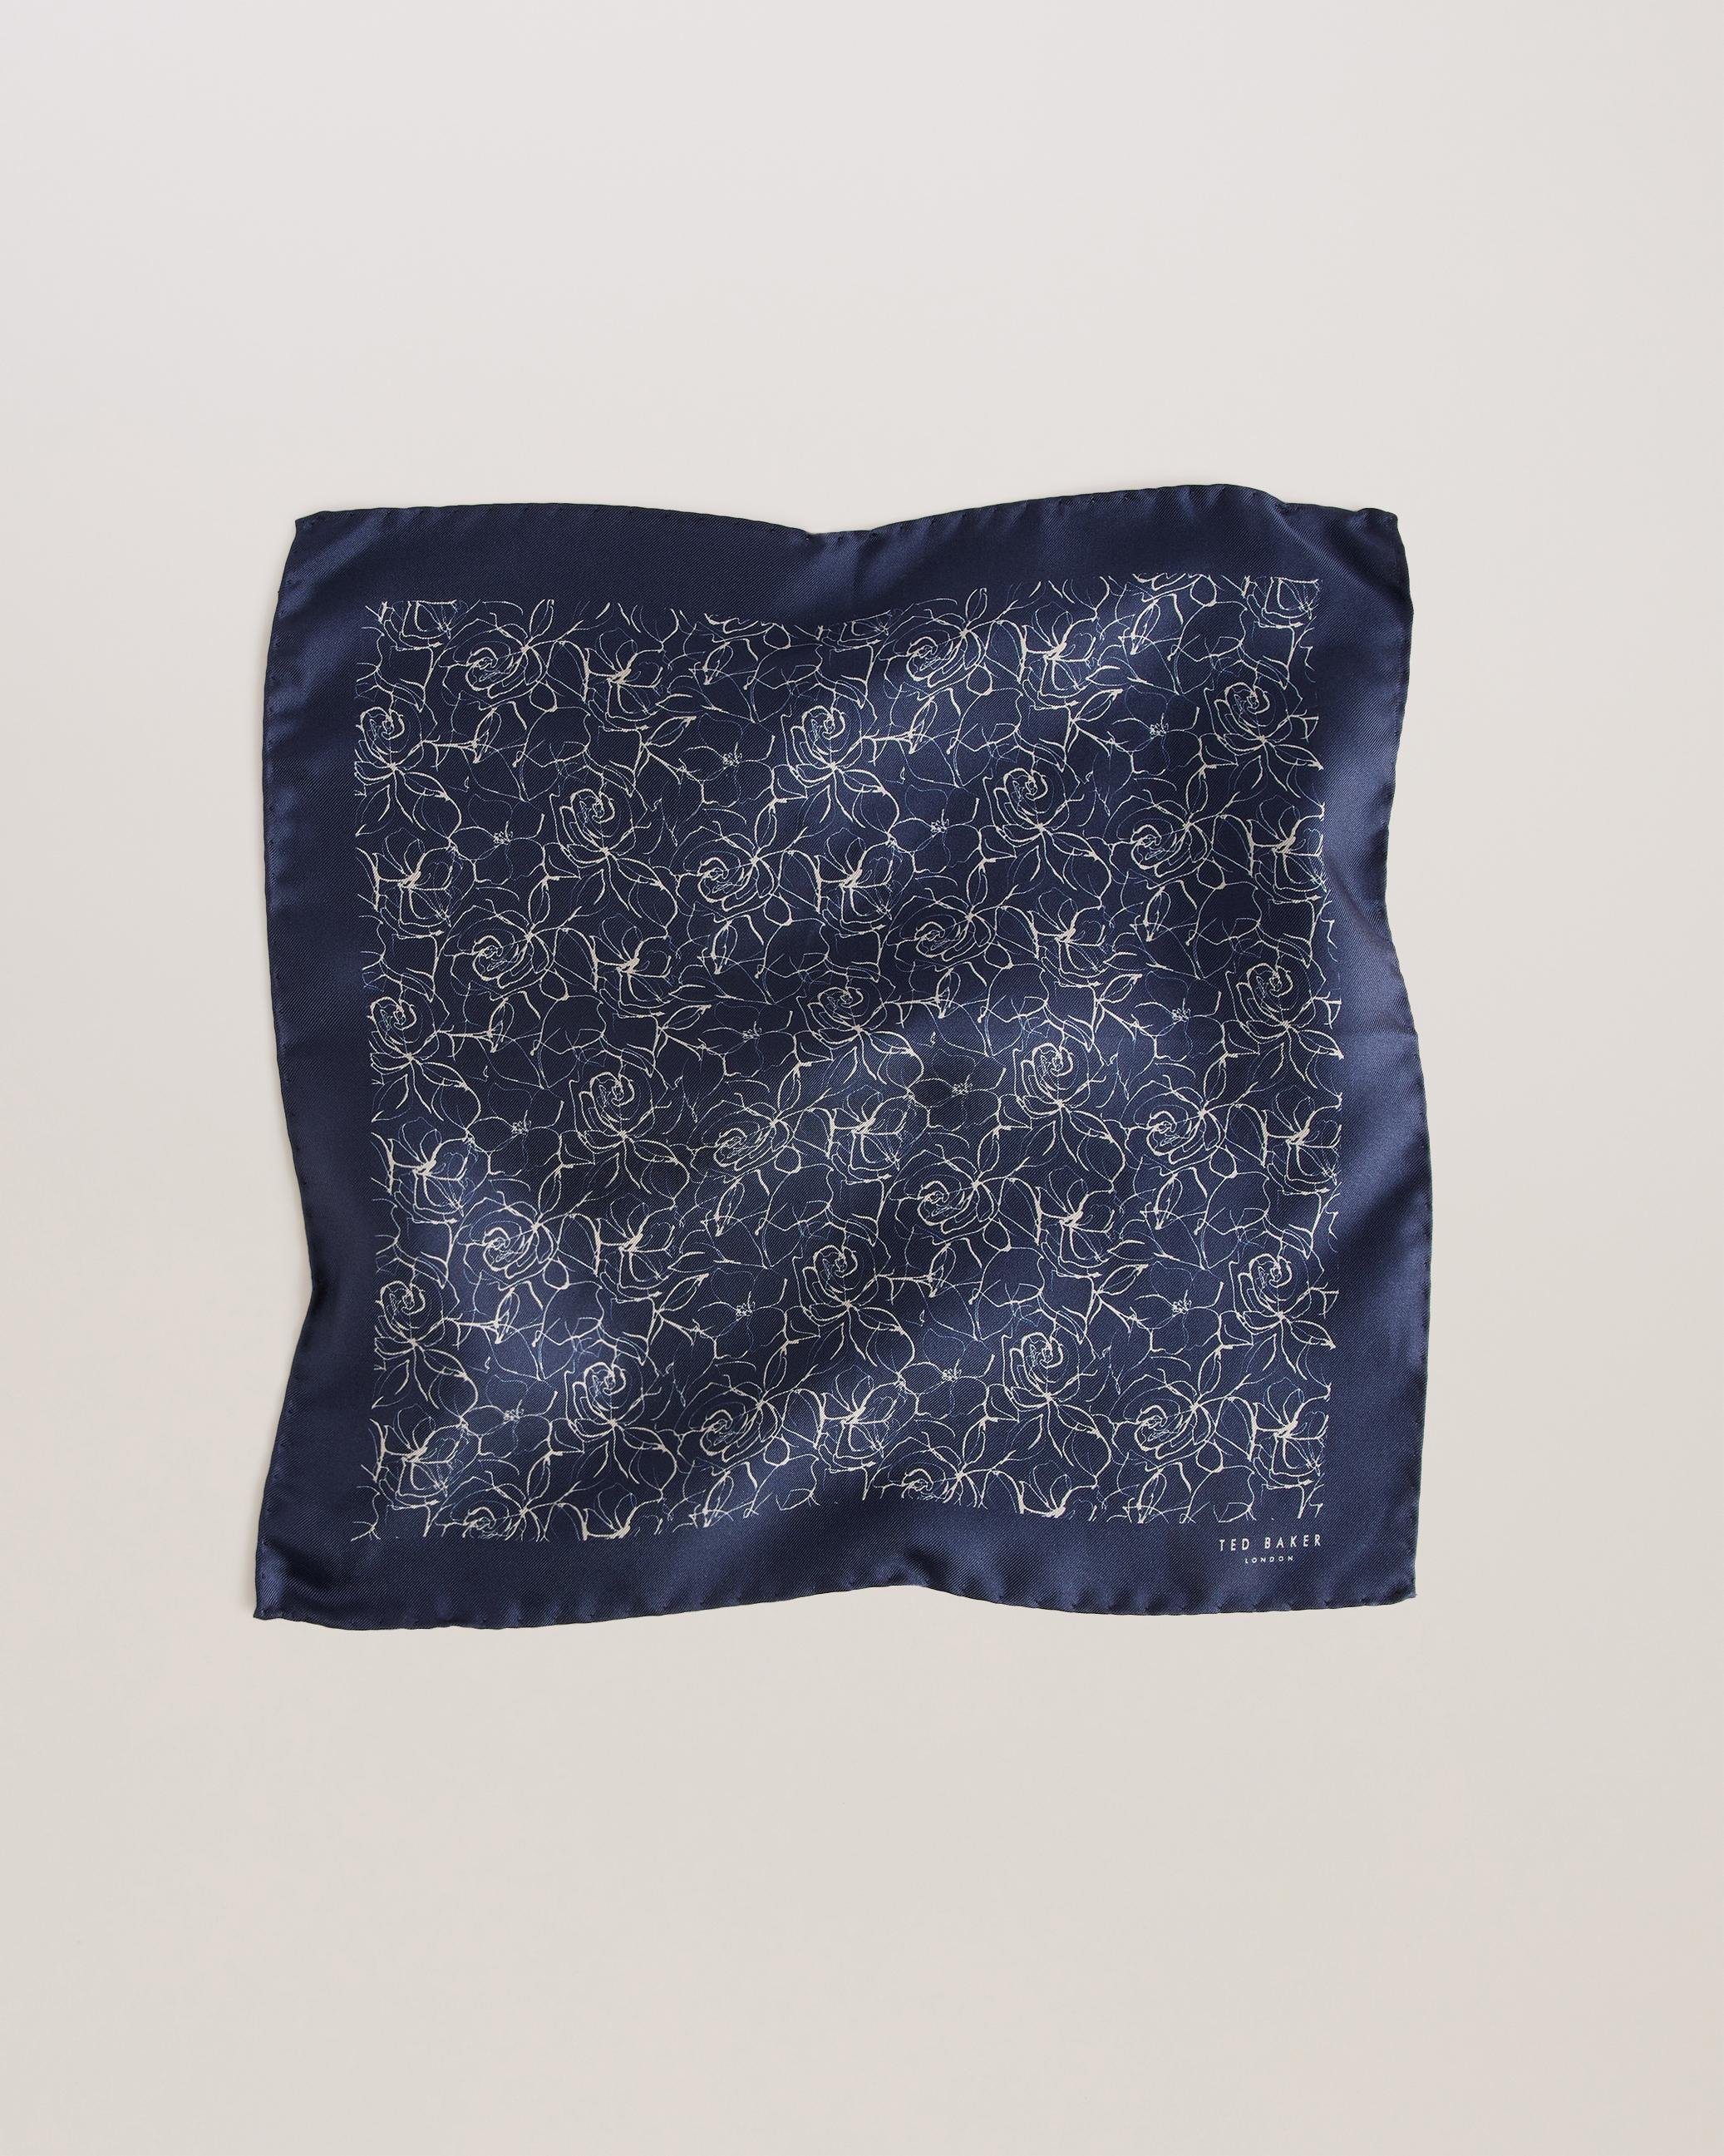 Abstract Floral Silk Pocket Square - CAVP - Navy by TED BAKER